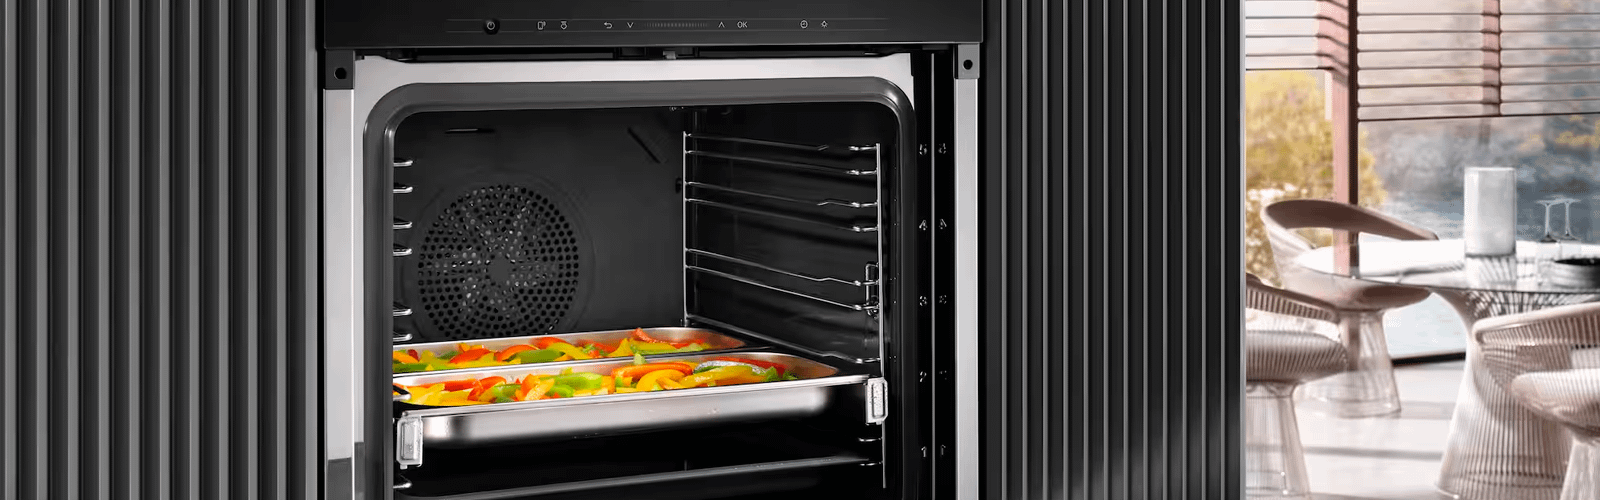 Open Miele oven with raw chopped bell peppers in trays inside.